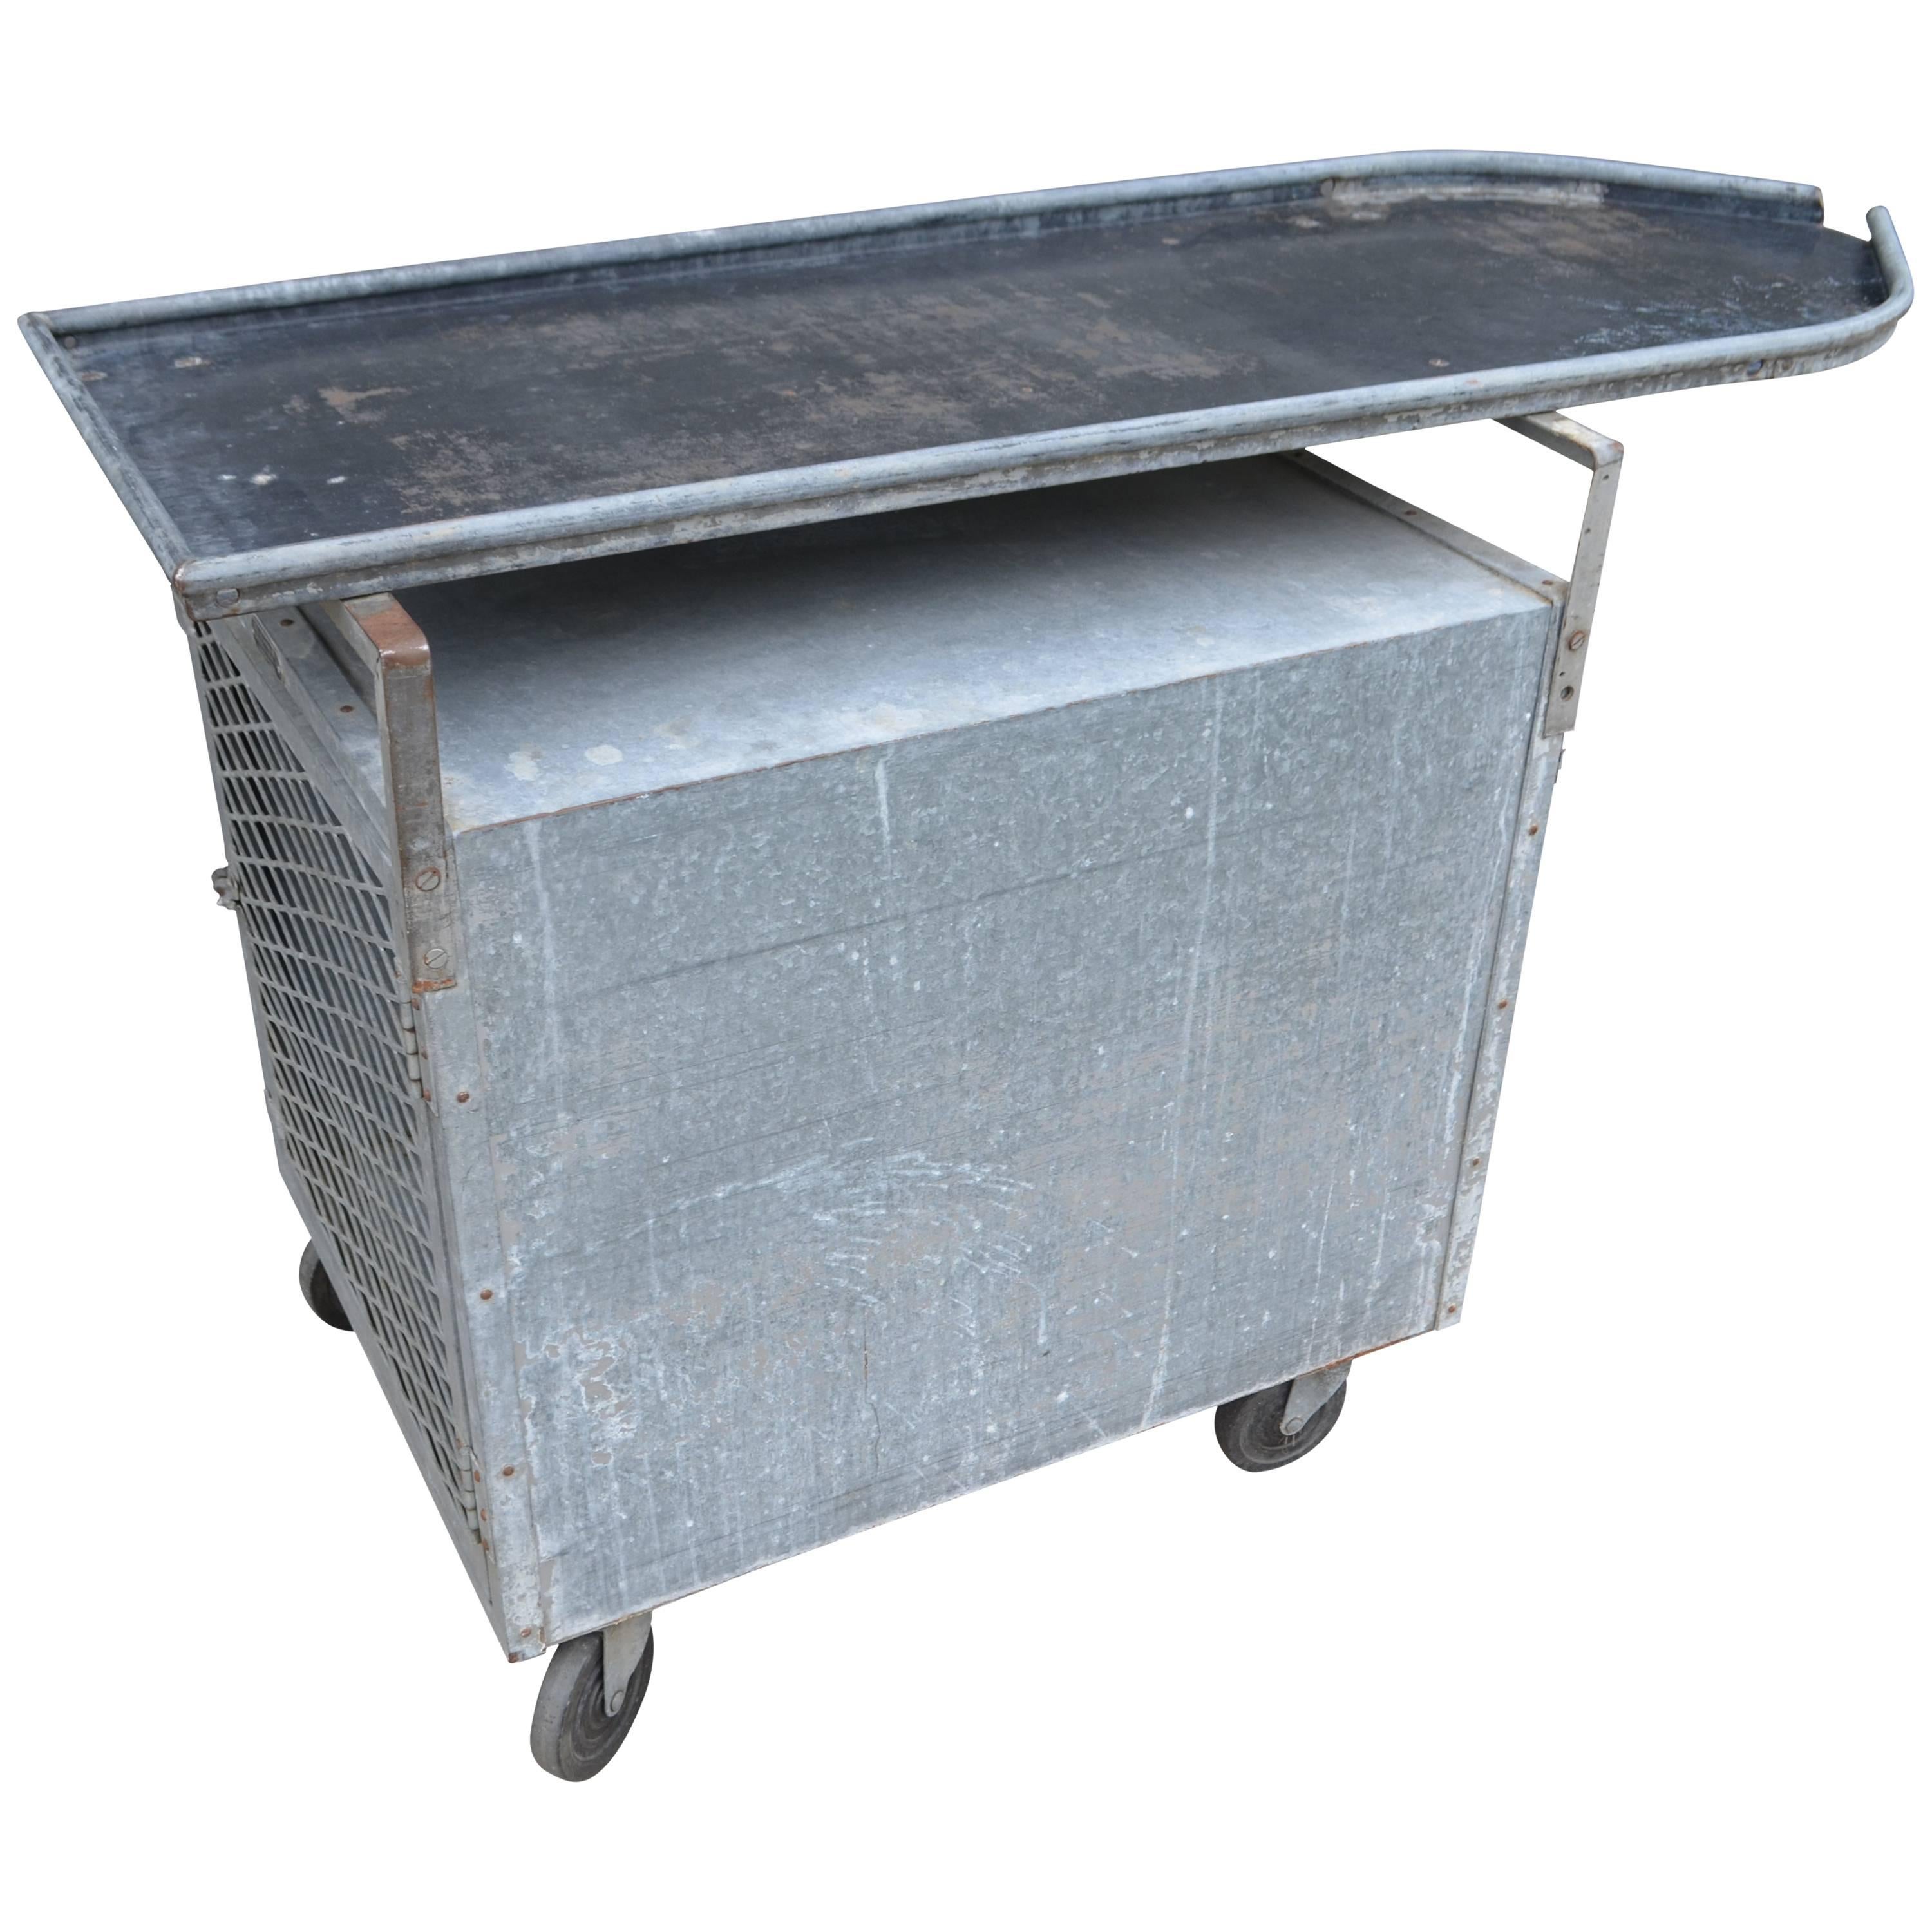 Bar on Wheels / Potting Table / Plant Stand from Galvanized Vet Exam Table